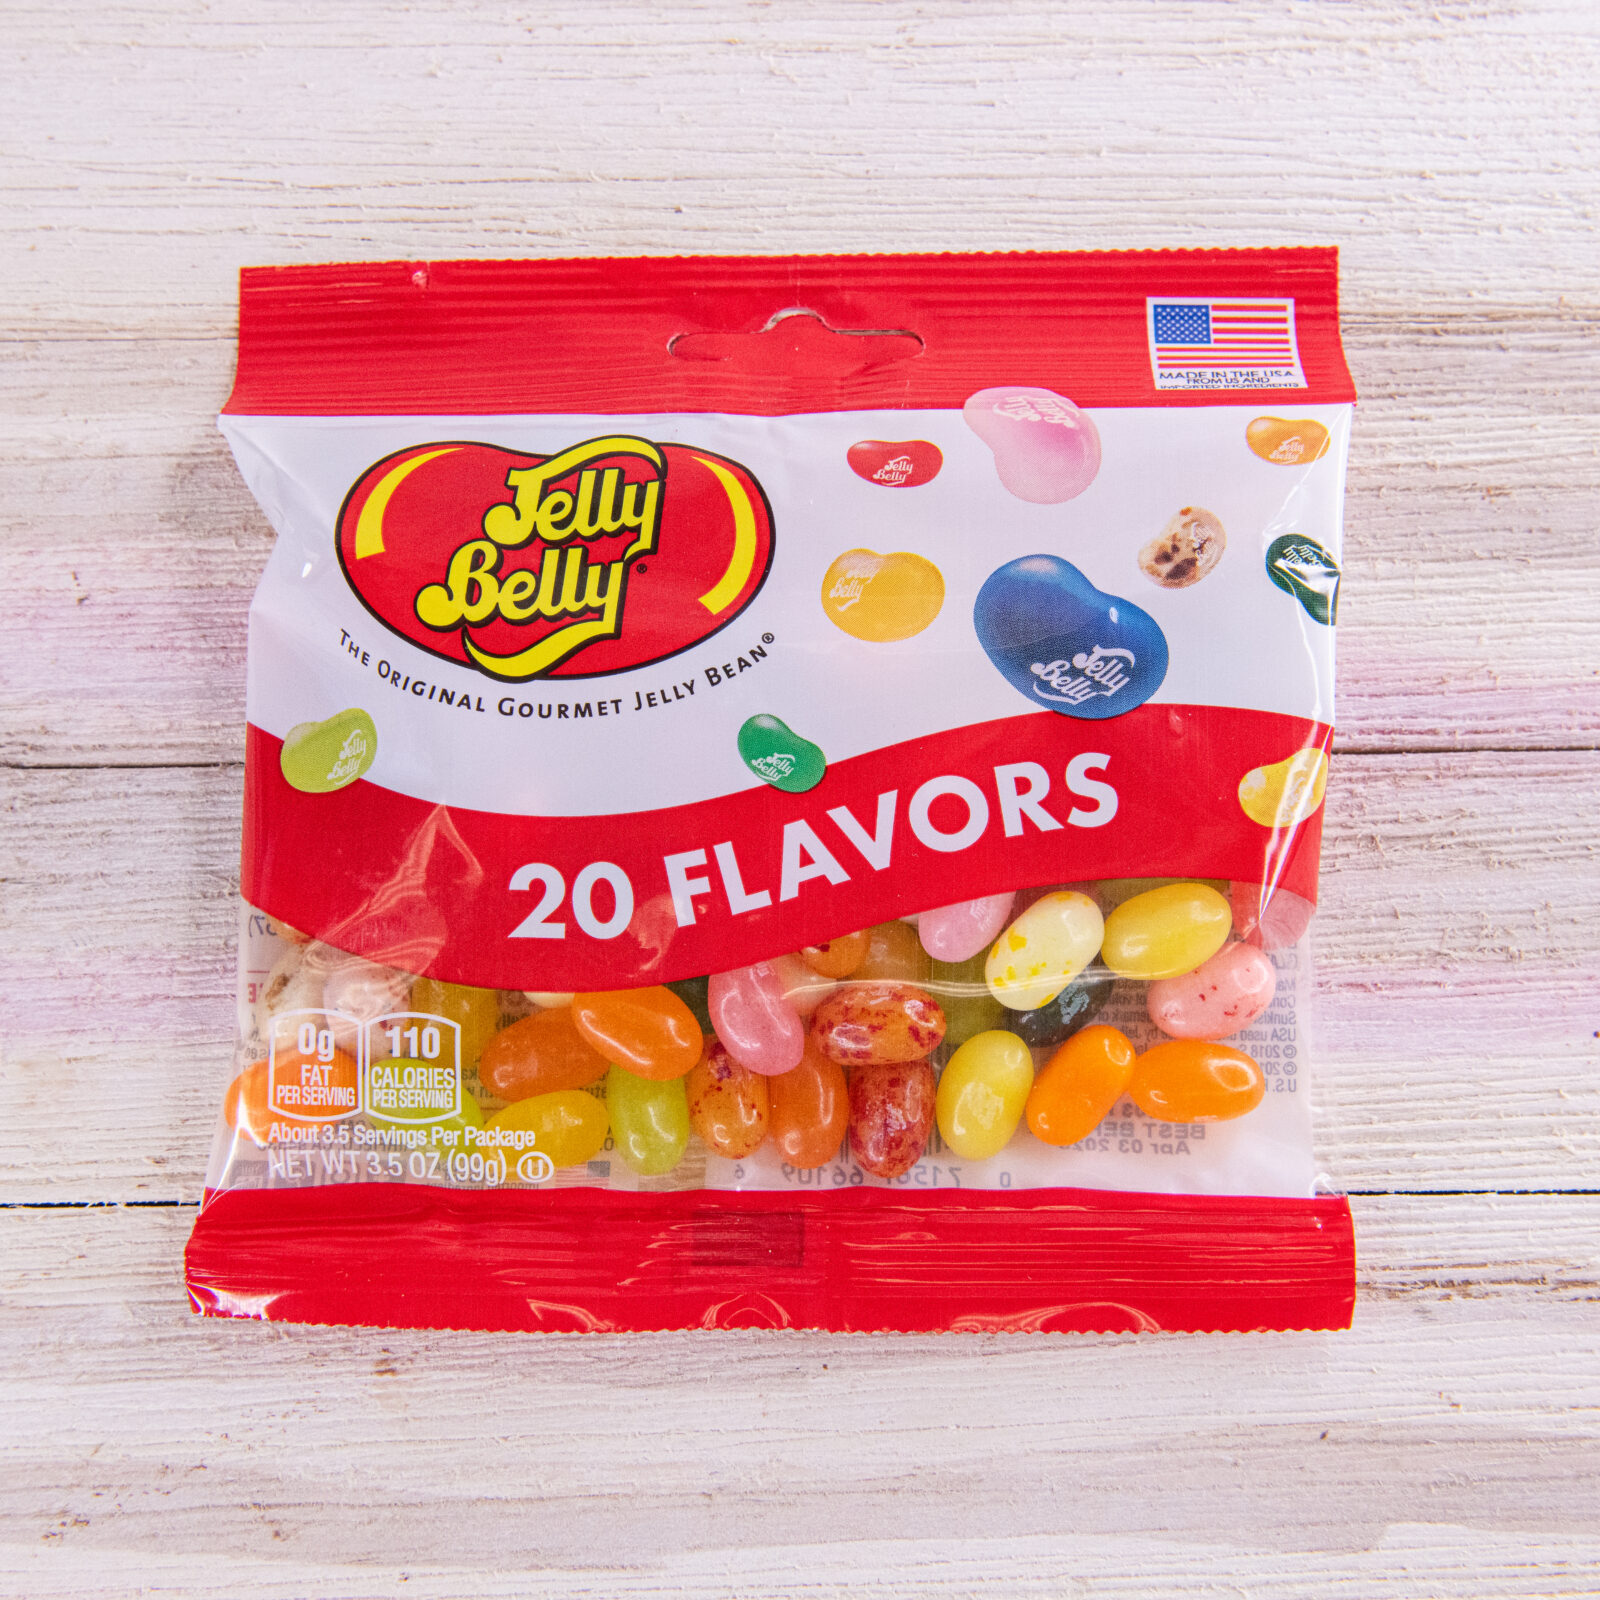 Jelly Belly 40 Flavor Original Gourmet Jelly Bean - Shop Candy at